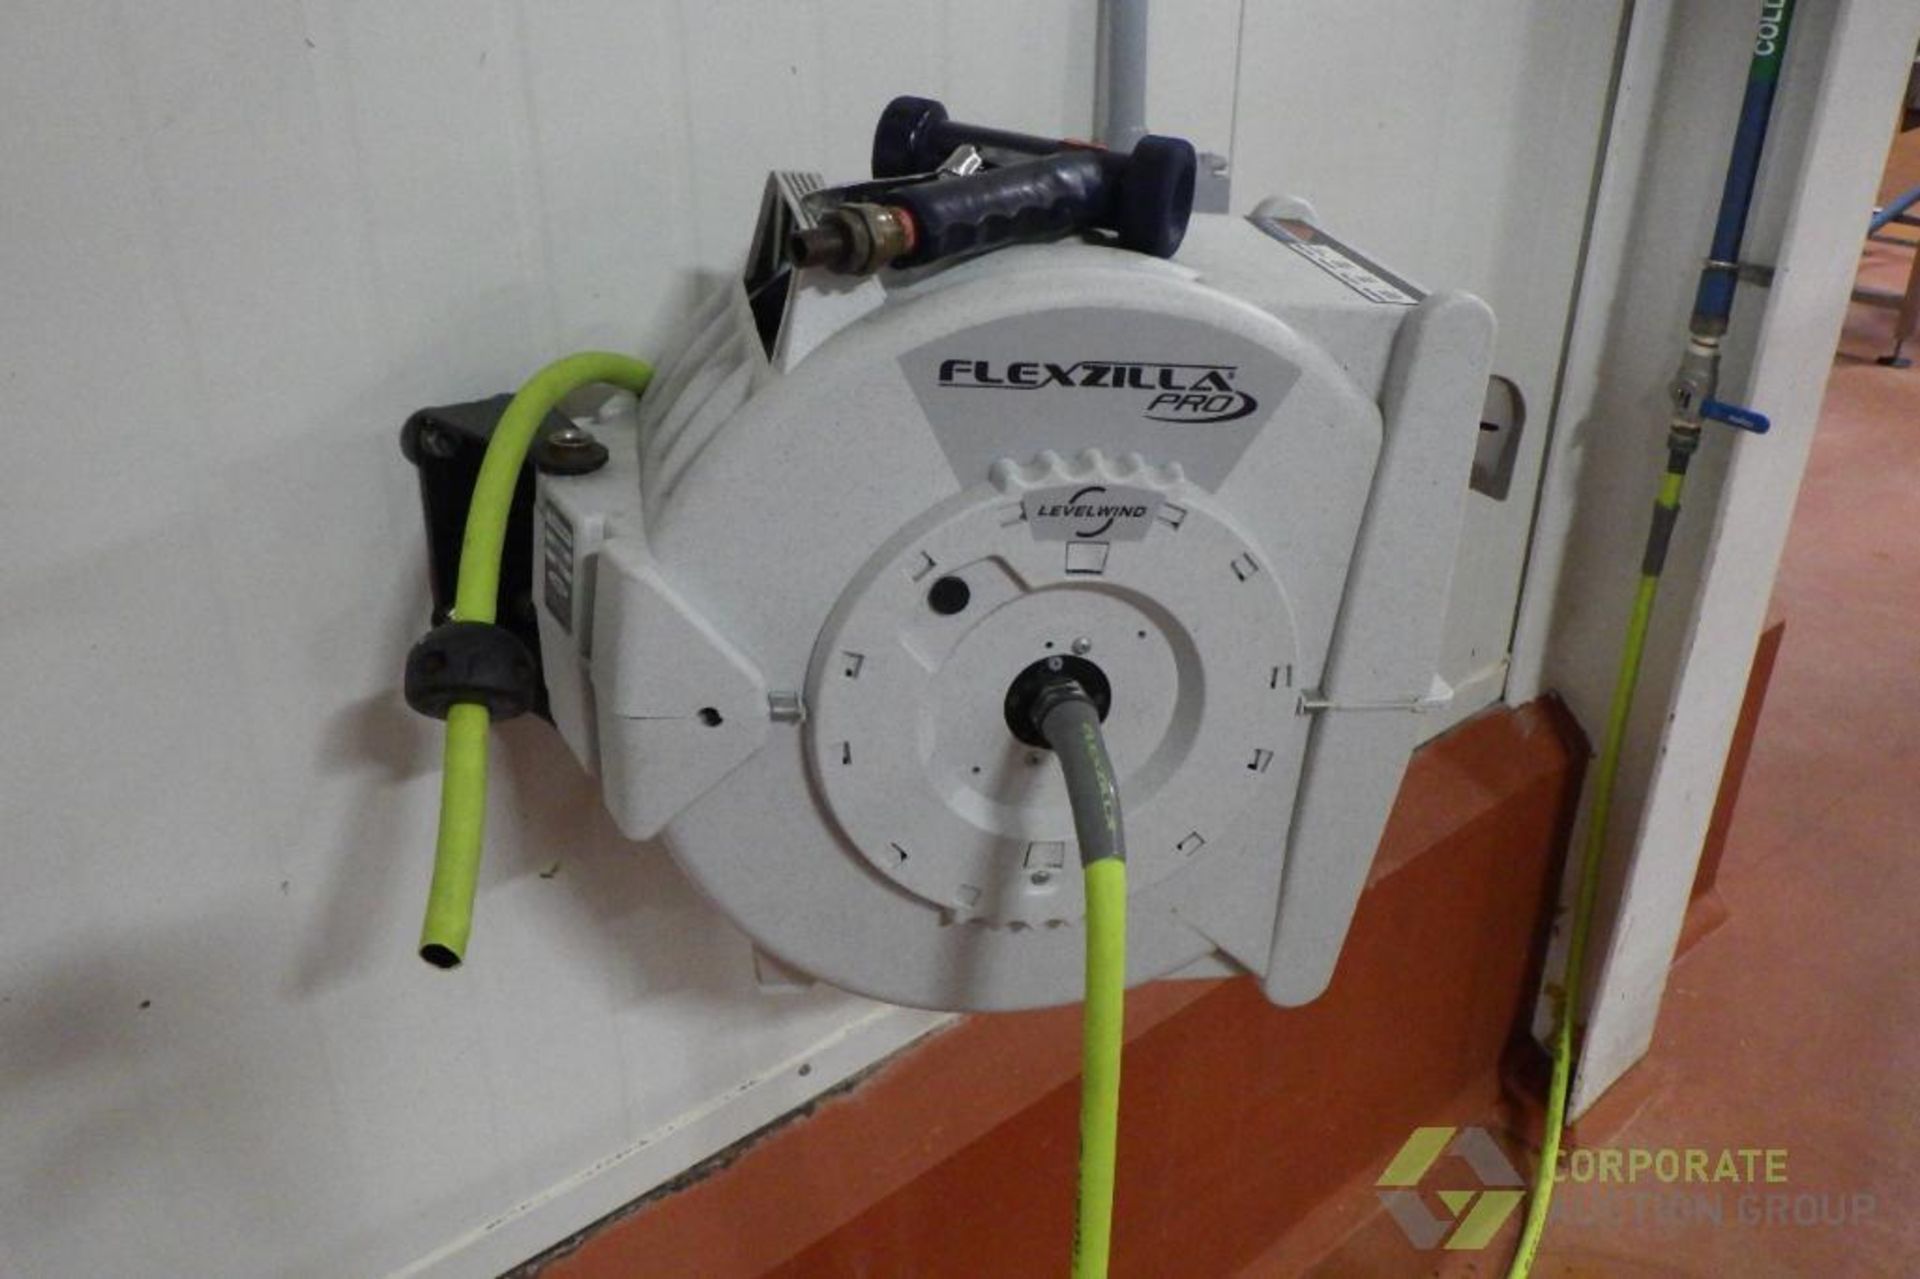 Flexzilla water hose reel and hose - Image 2 of 5